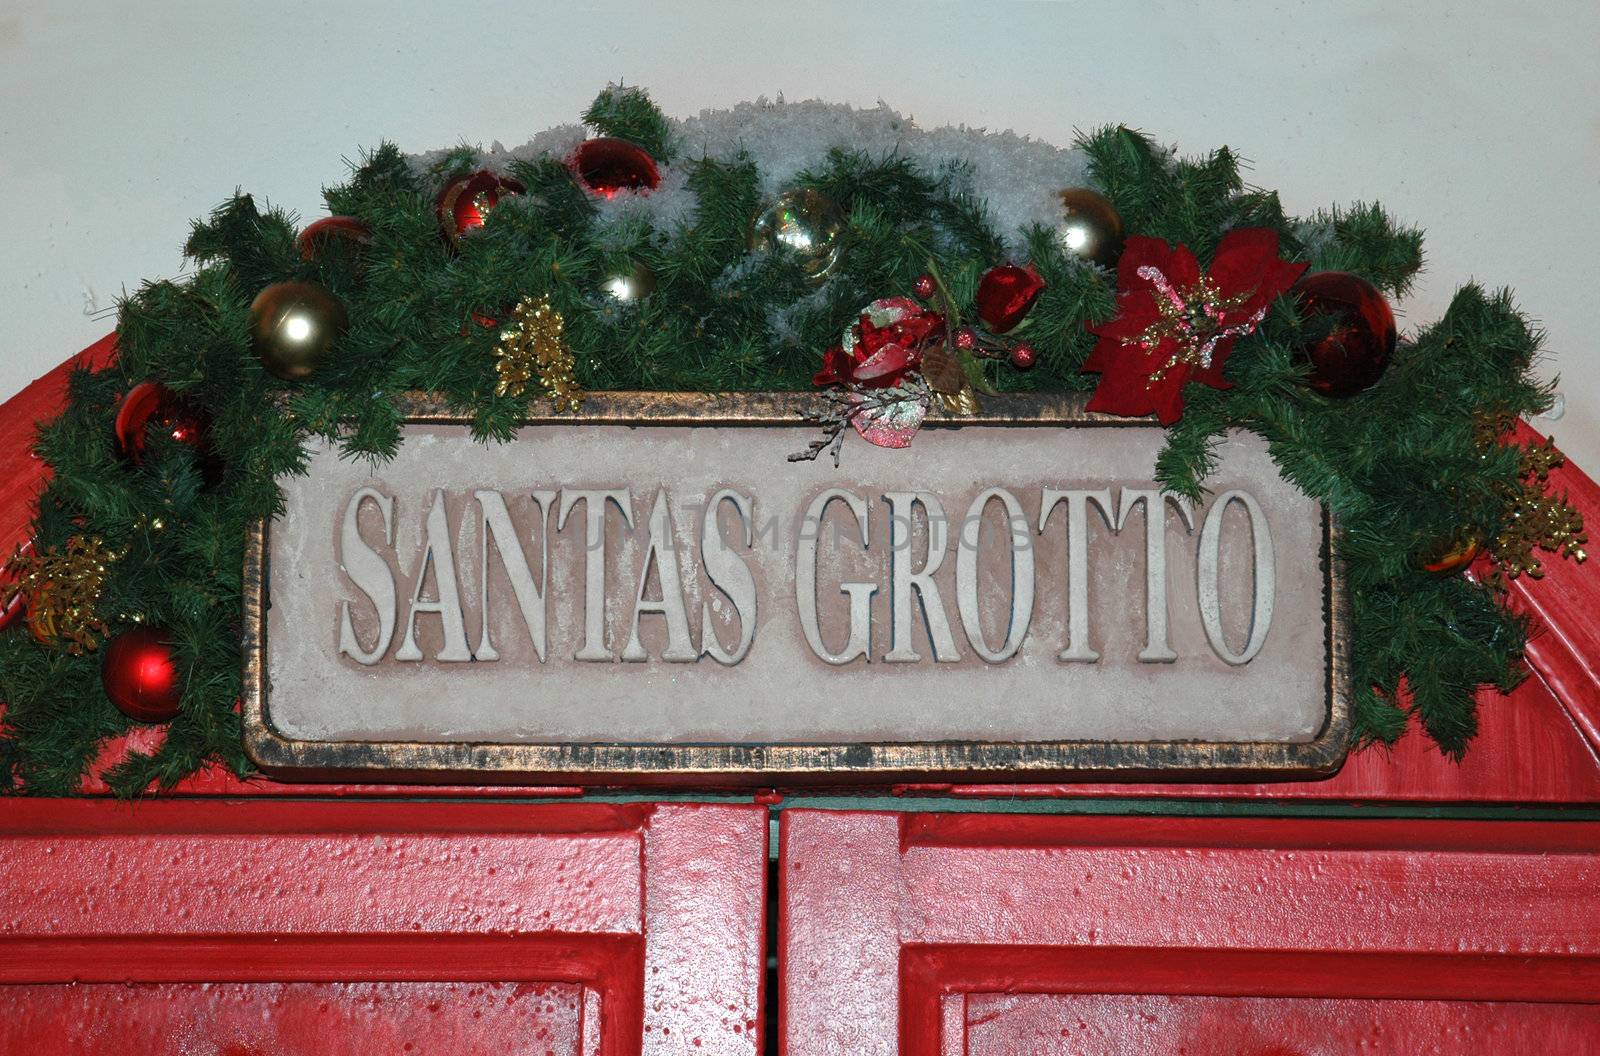 Santa's Grotto by TimAwe